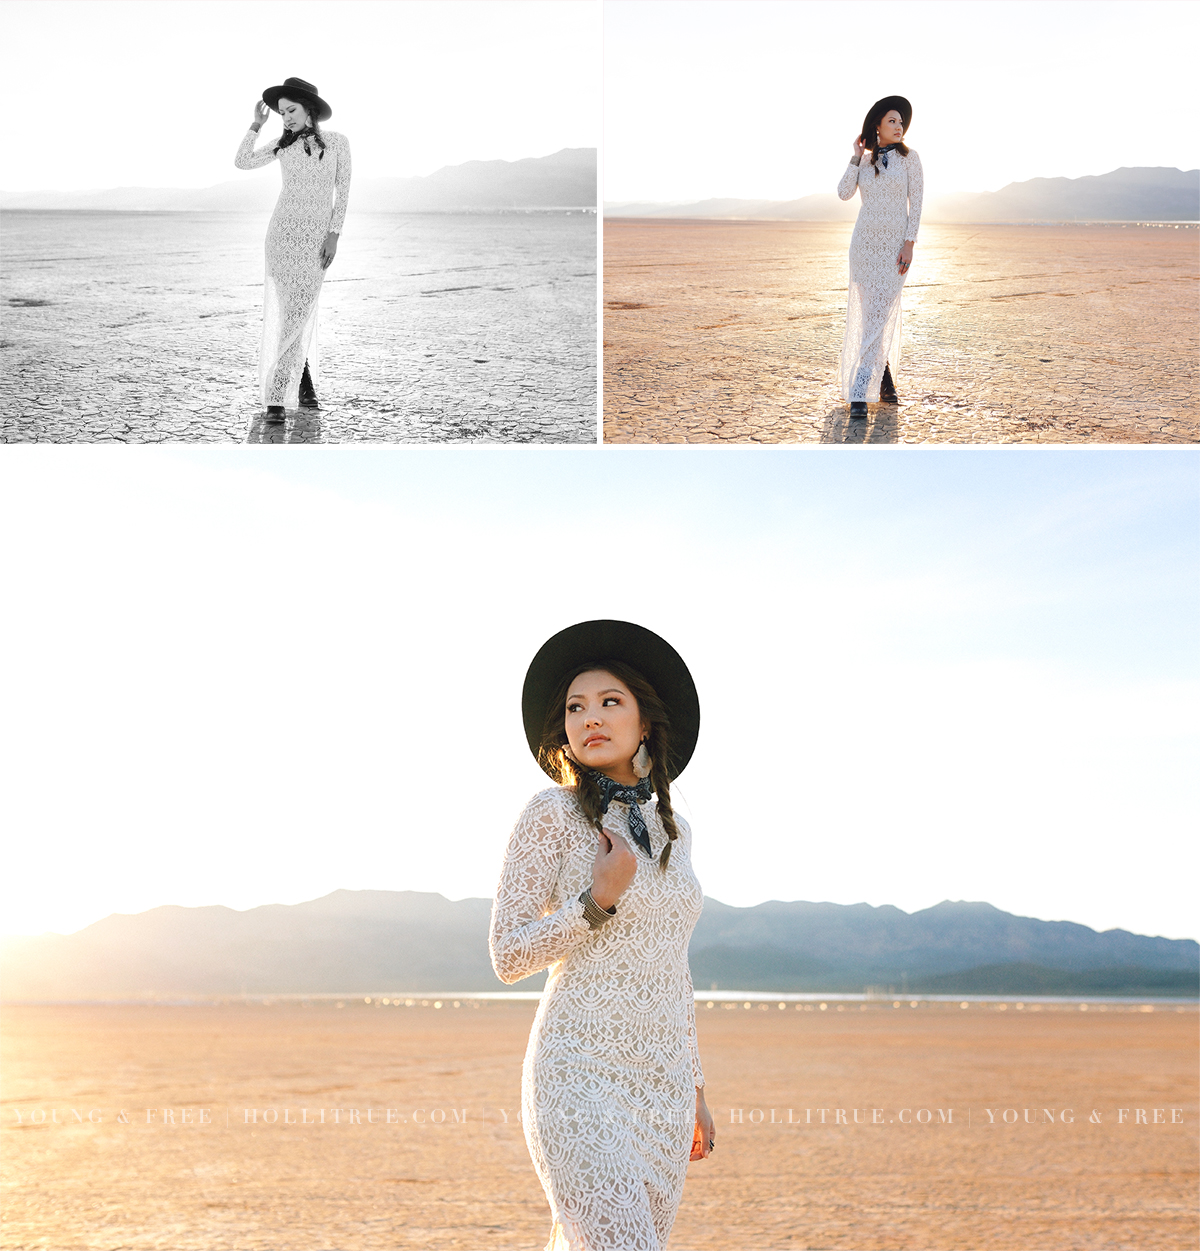 Nelson Ghost Town Senior Portrait Model Session | Deconstructed Shootout in Las Vegas, Nevada | Holli True Photography | Stylish Senior Photography in a desert location at sunset